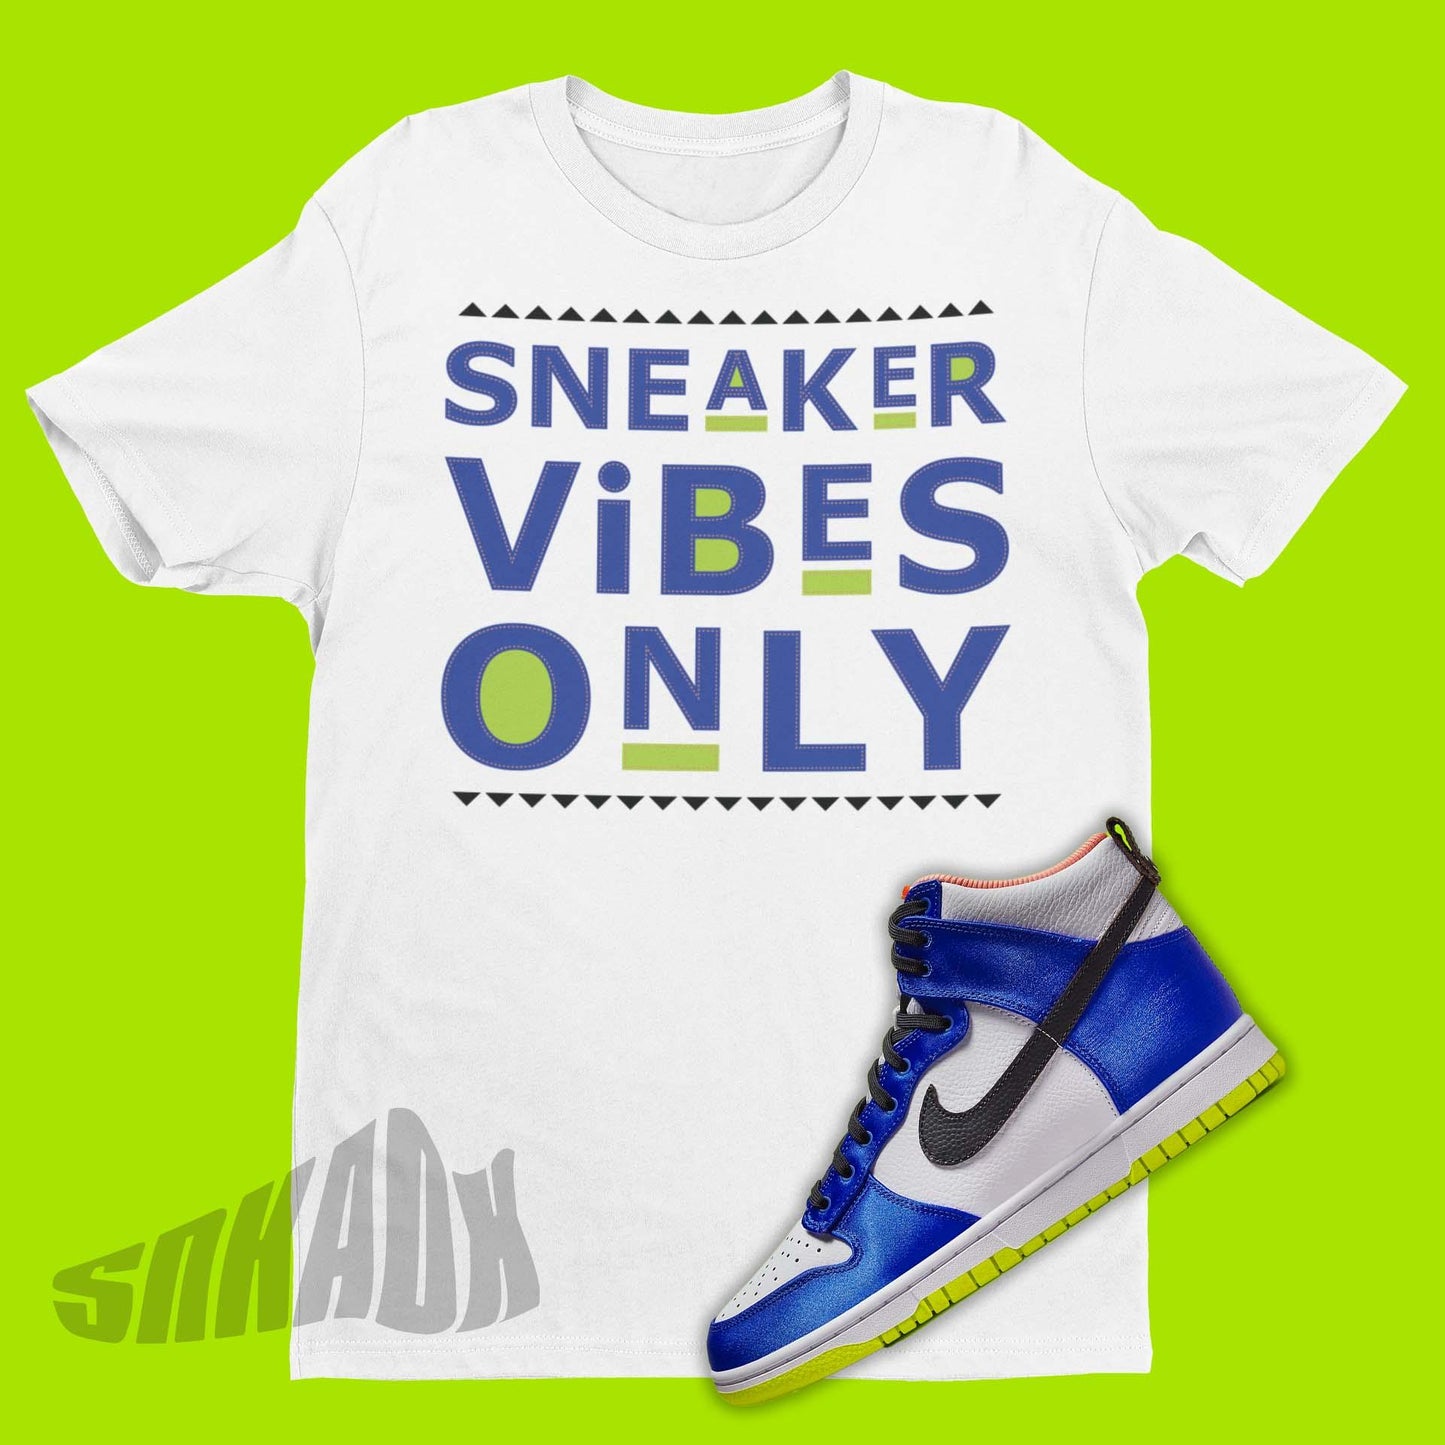 Sneaker Vibes Only Shirt To Match Nike Dunk High Blue Satin